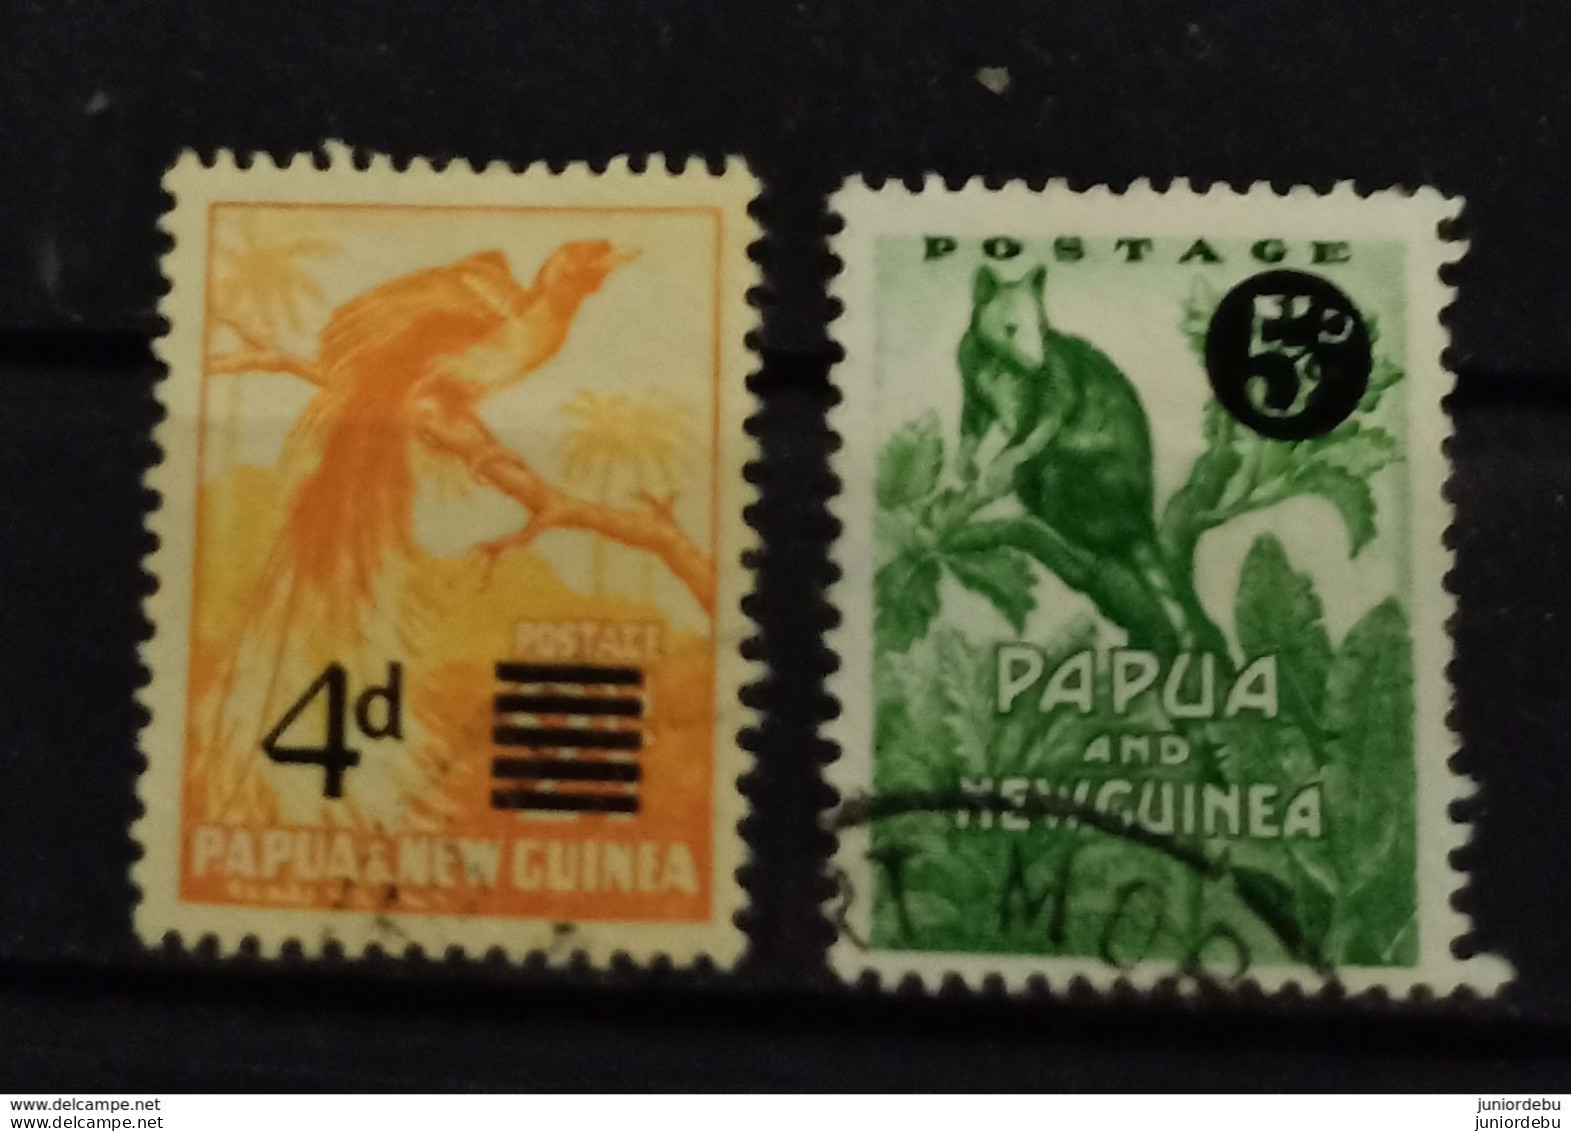 Papua New Guinea -  1967 - 1959 Surcharged On 1952 Local Motif Issues  - 2 Diff -  USED. ( D) - ( OL 03/04/2020) - Papouasie-Nouvelle-Guinée